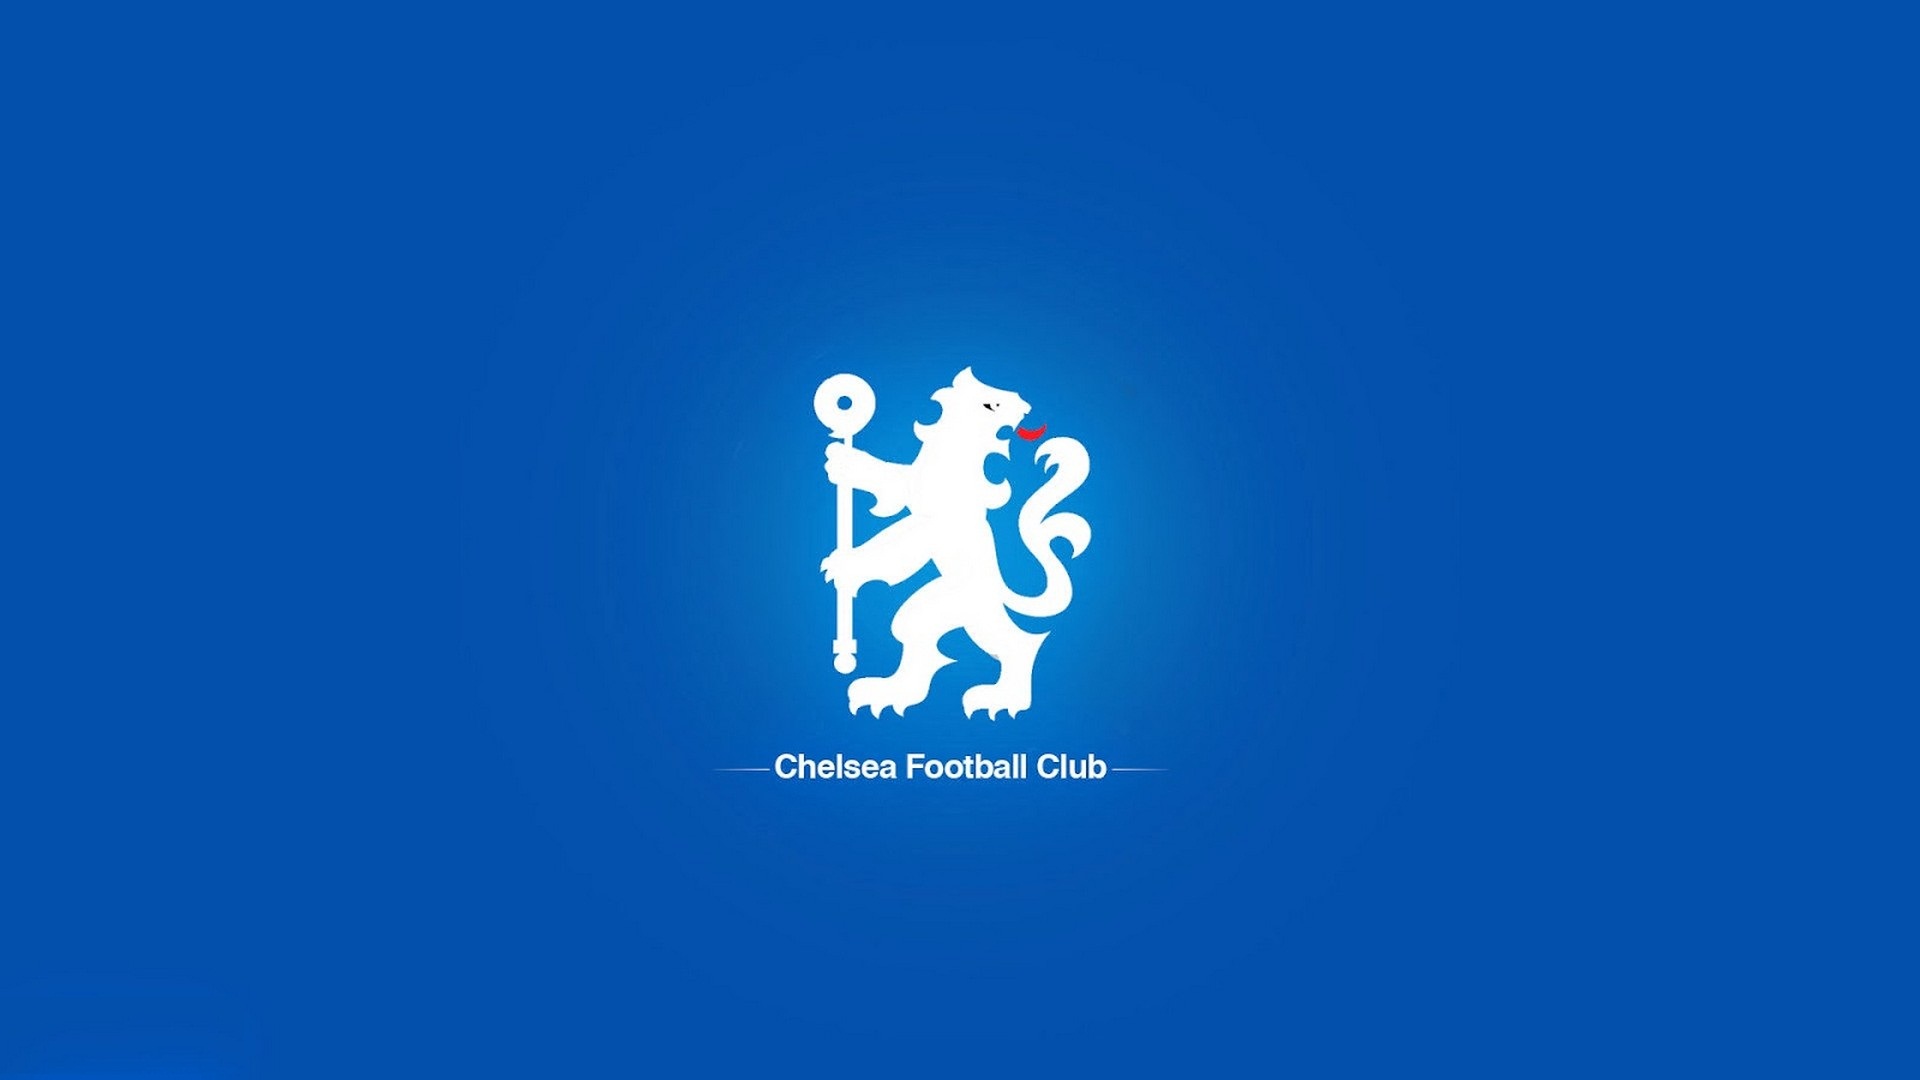 Chelsea London Wallpaper With Resolution 1920X1080 pixel. You can make this wallpaper for your Mac or Windows Desktop Background, iPhone, Android or Tablet and another Smartphone device for free